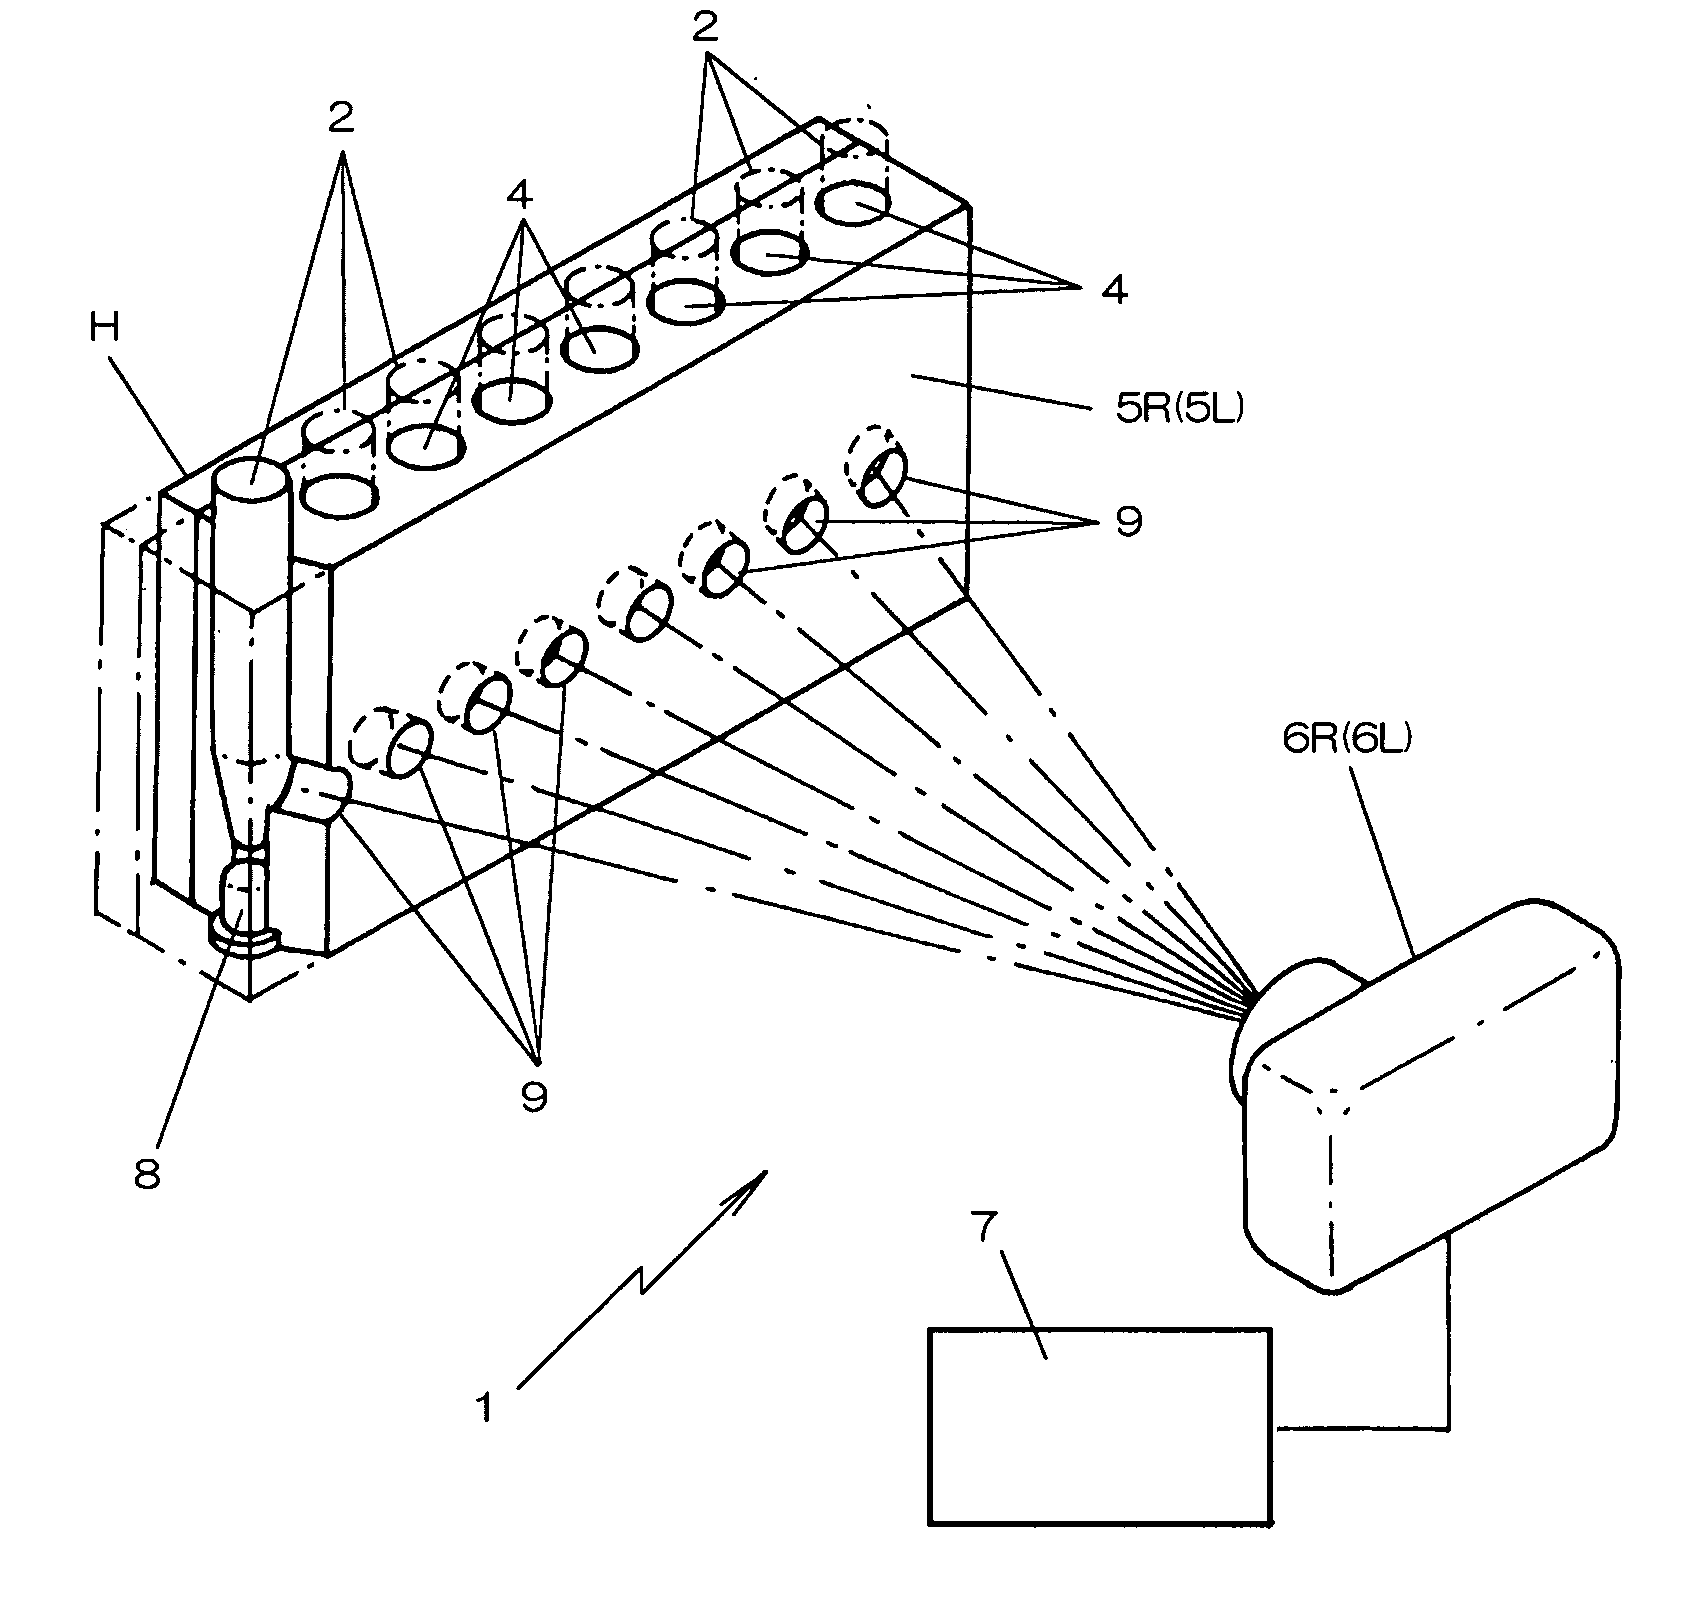 Optical inspection device